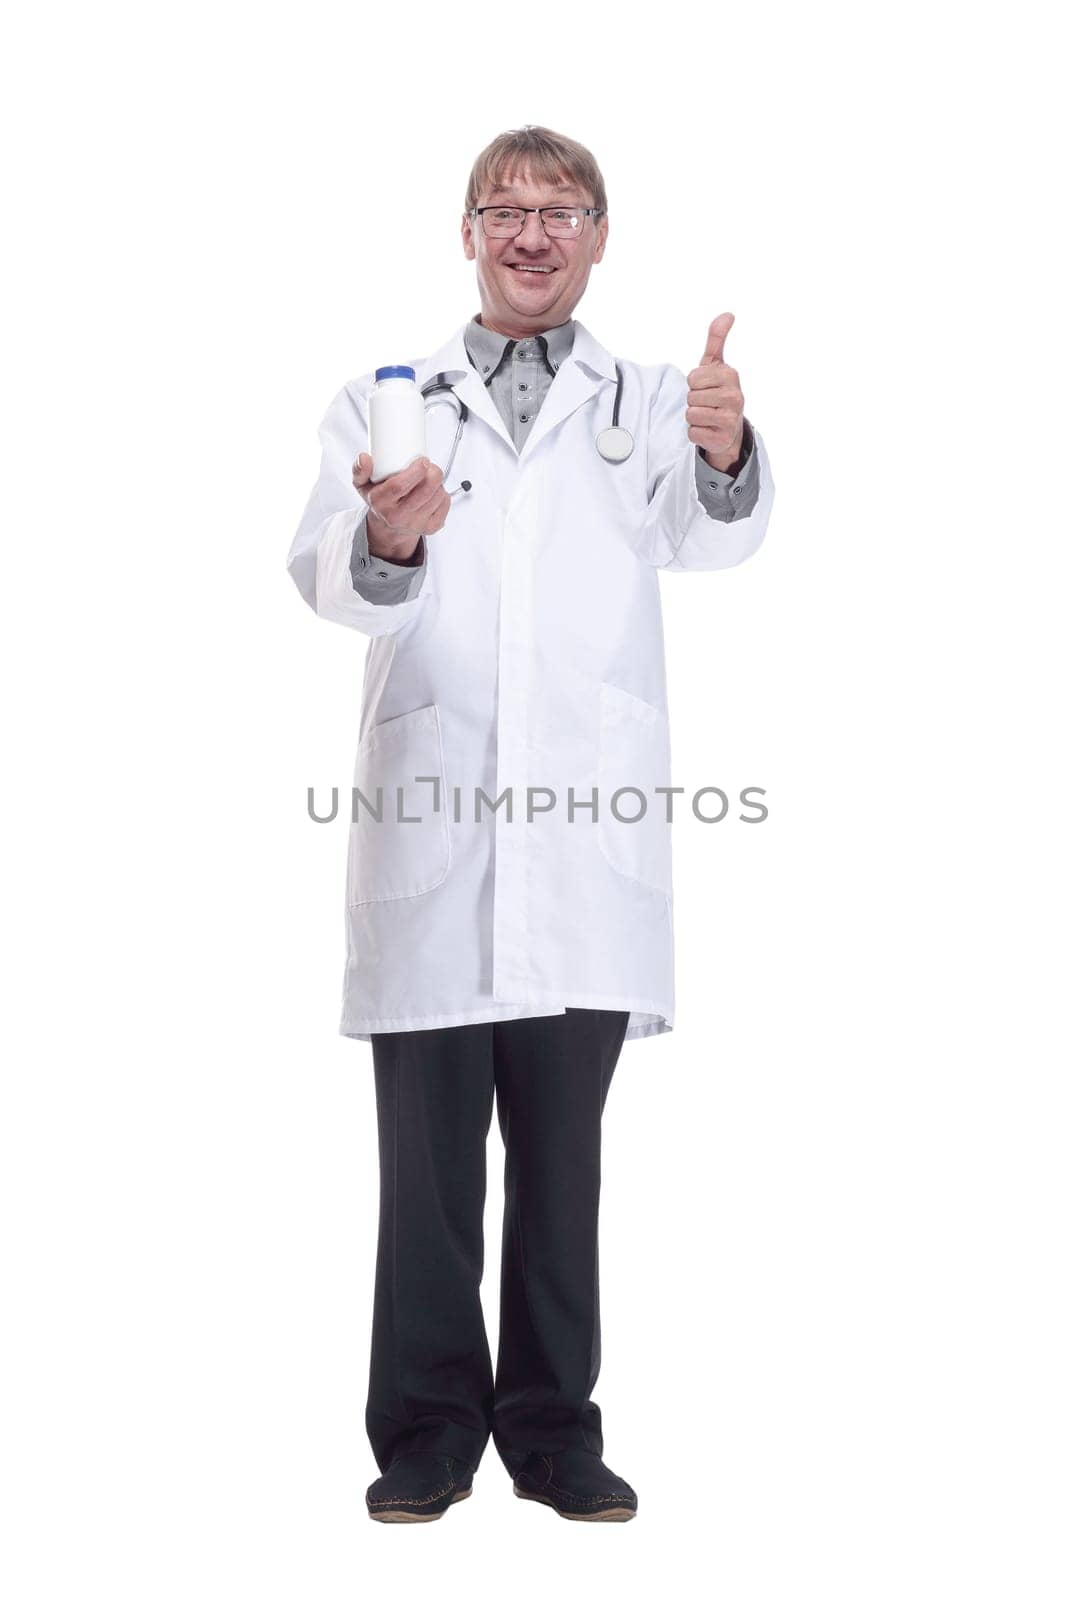 in full growth.smiling doctor showing a bottle of antiseptic. isolated on a white background.